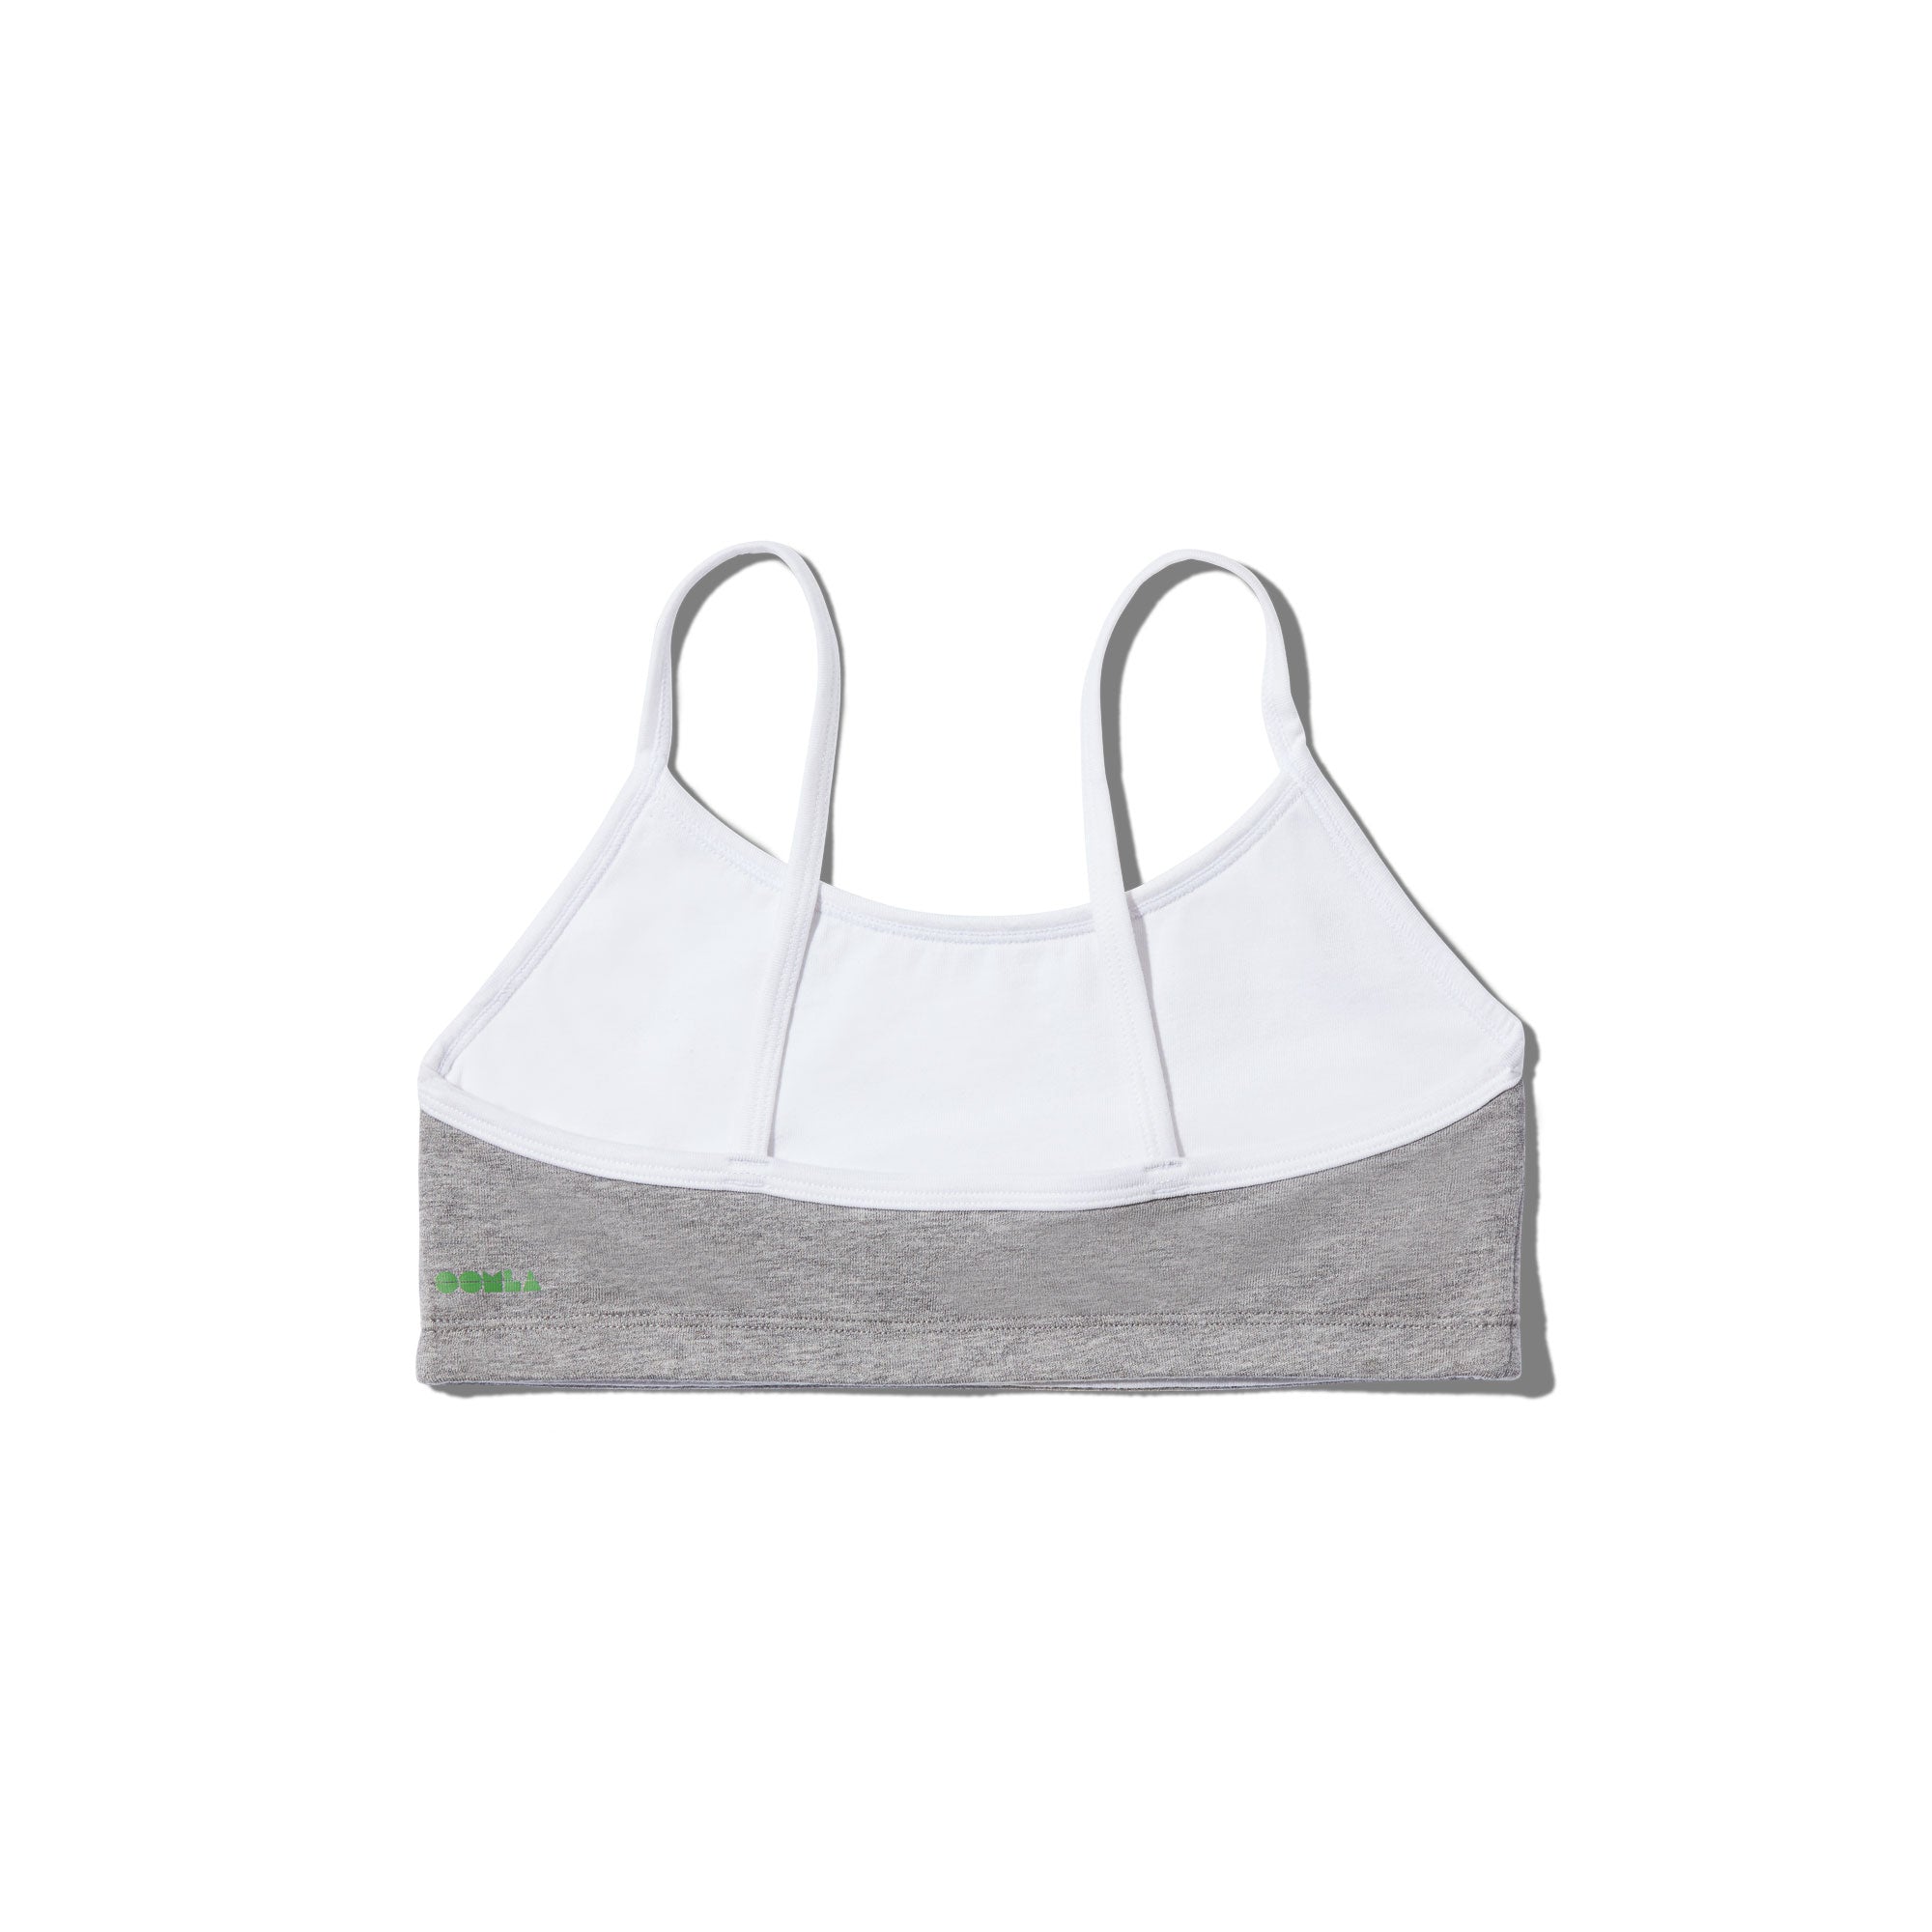 Softest bra ever for tweens & teens: cotton, reversible, and revolutionary